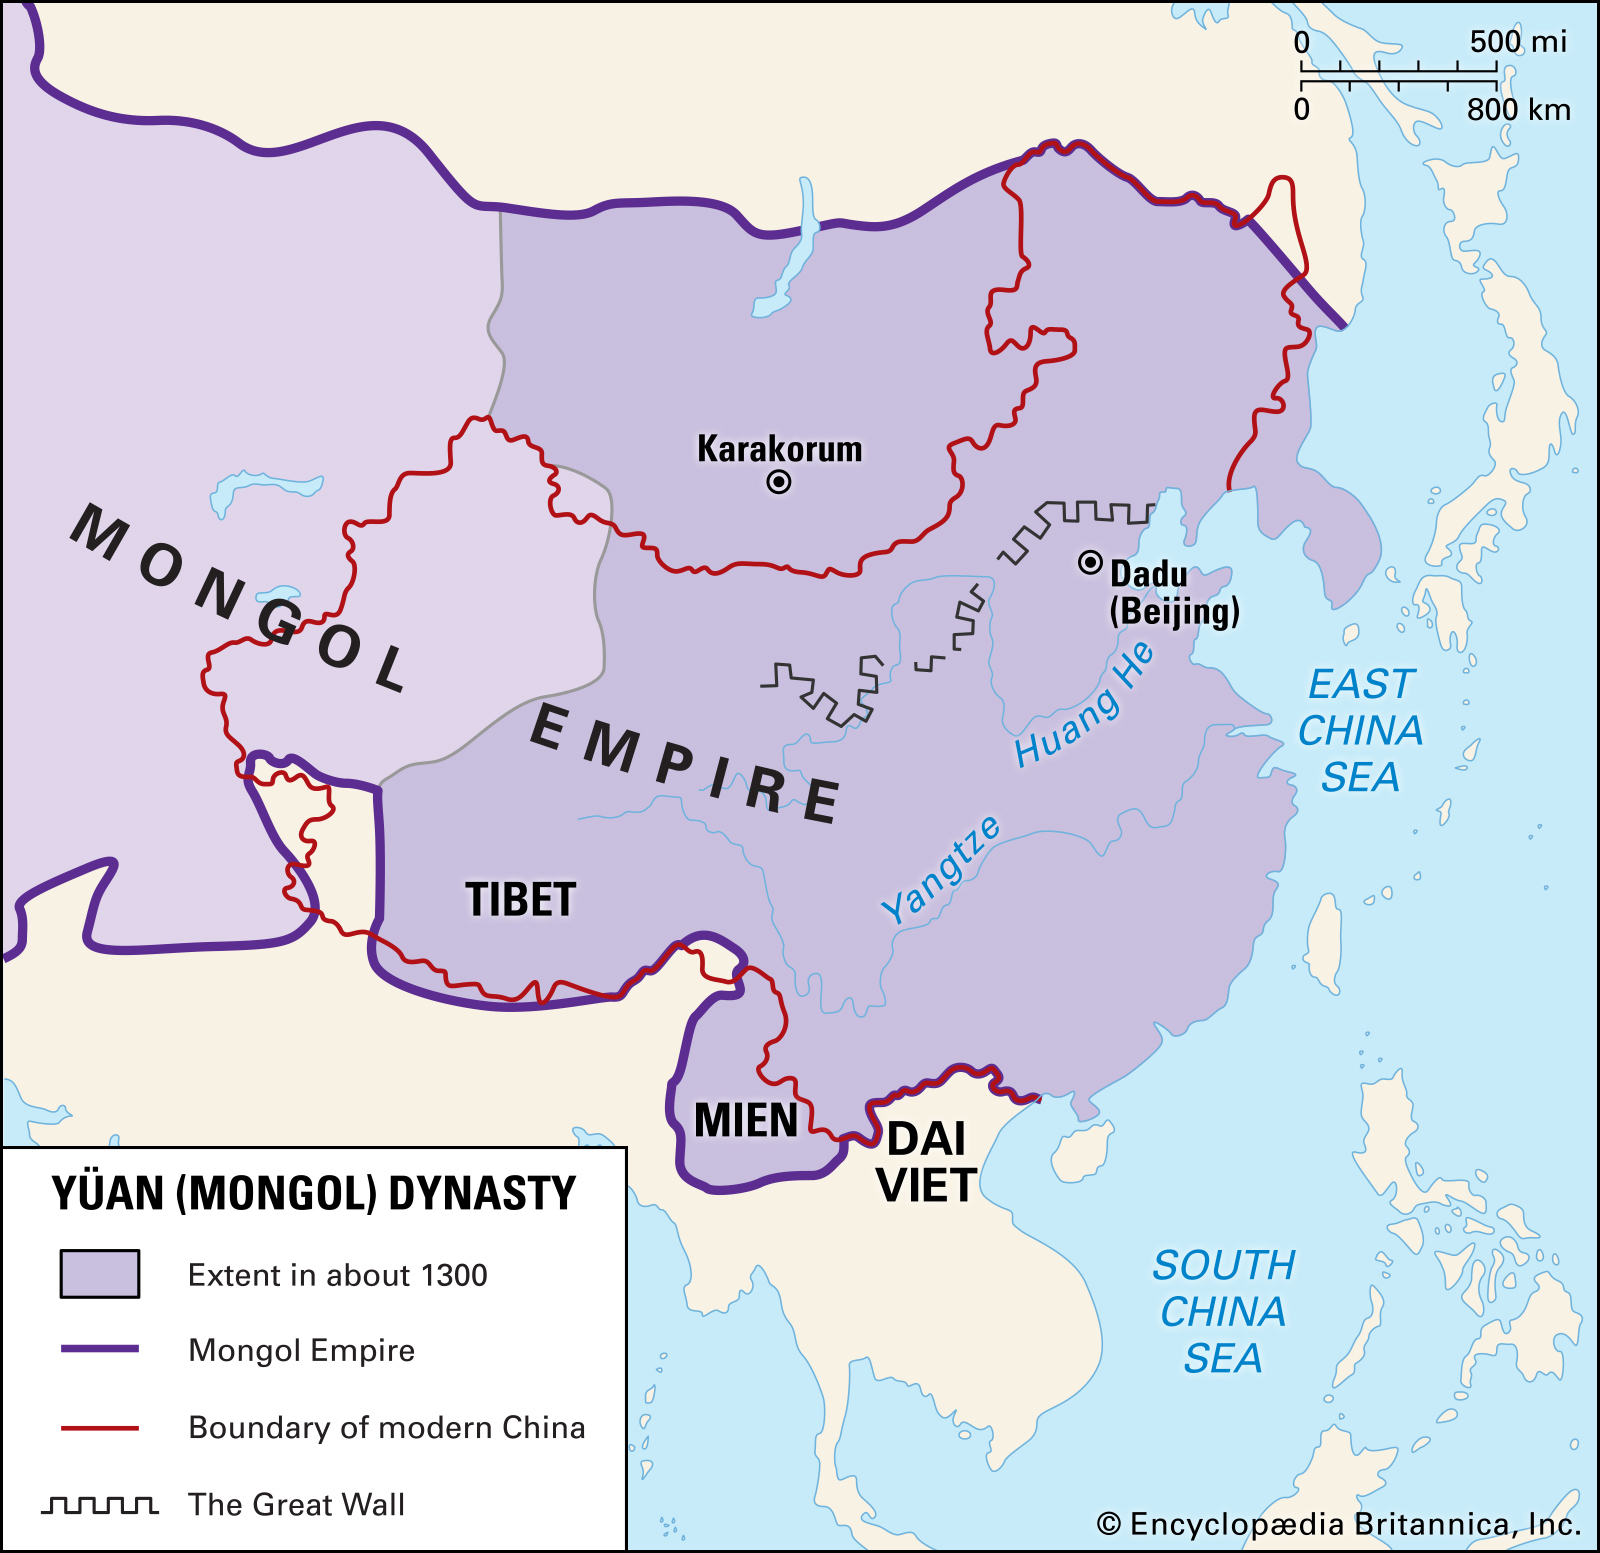 Map of the Yuan Dynasty (the white stripes) (Idh0854, CC BY 3.0)